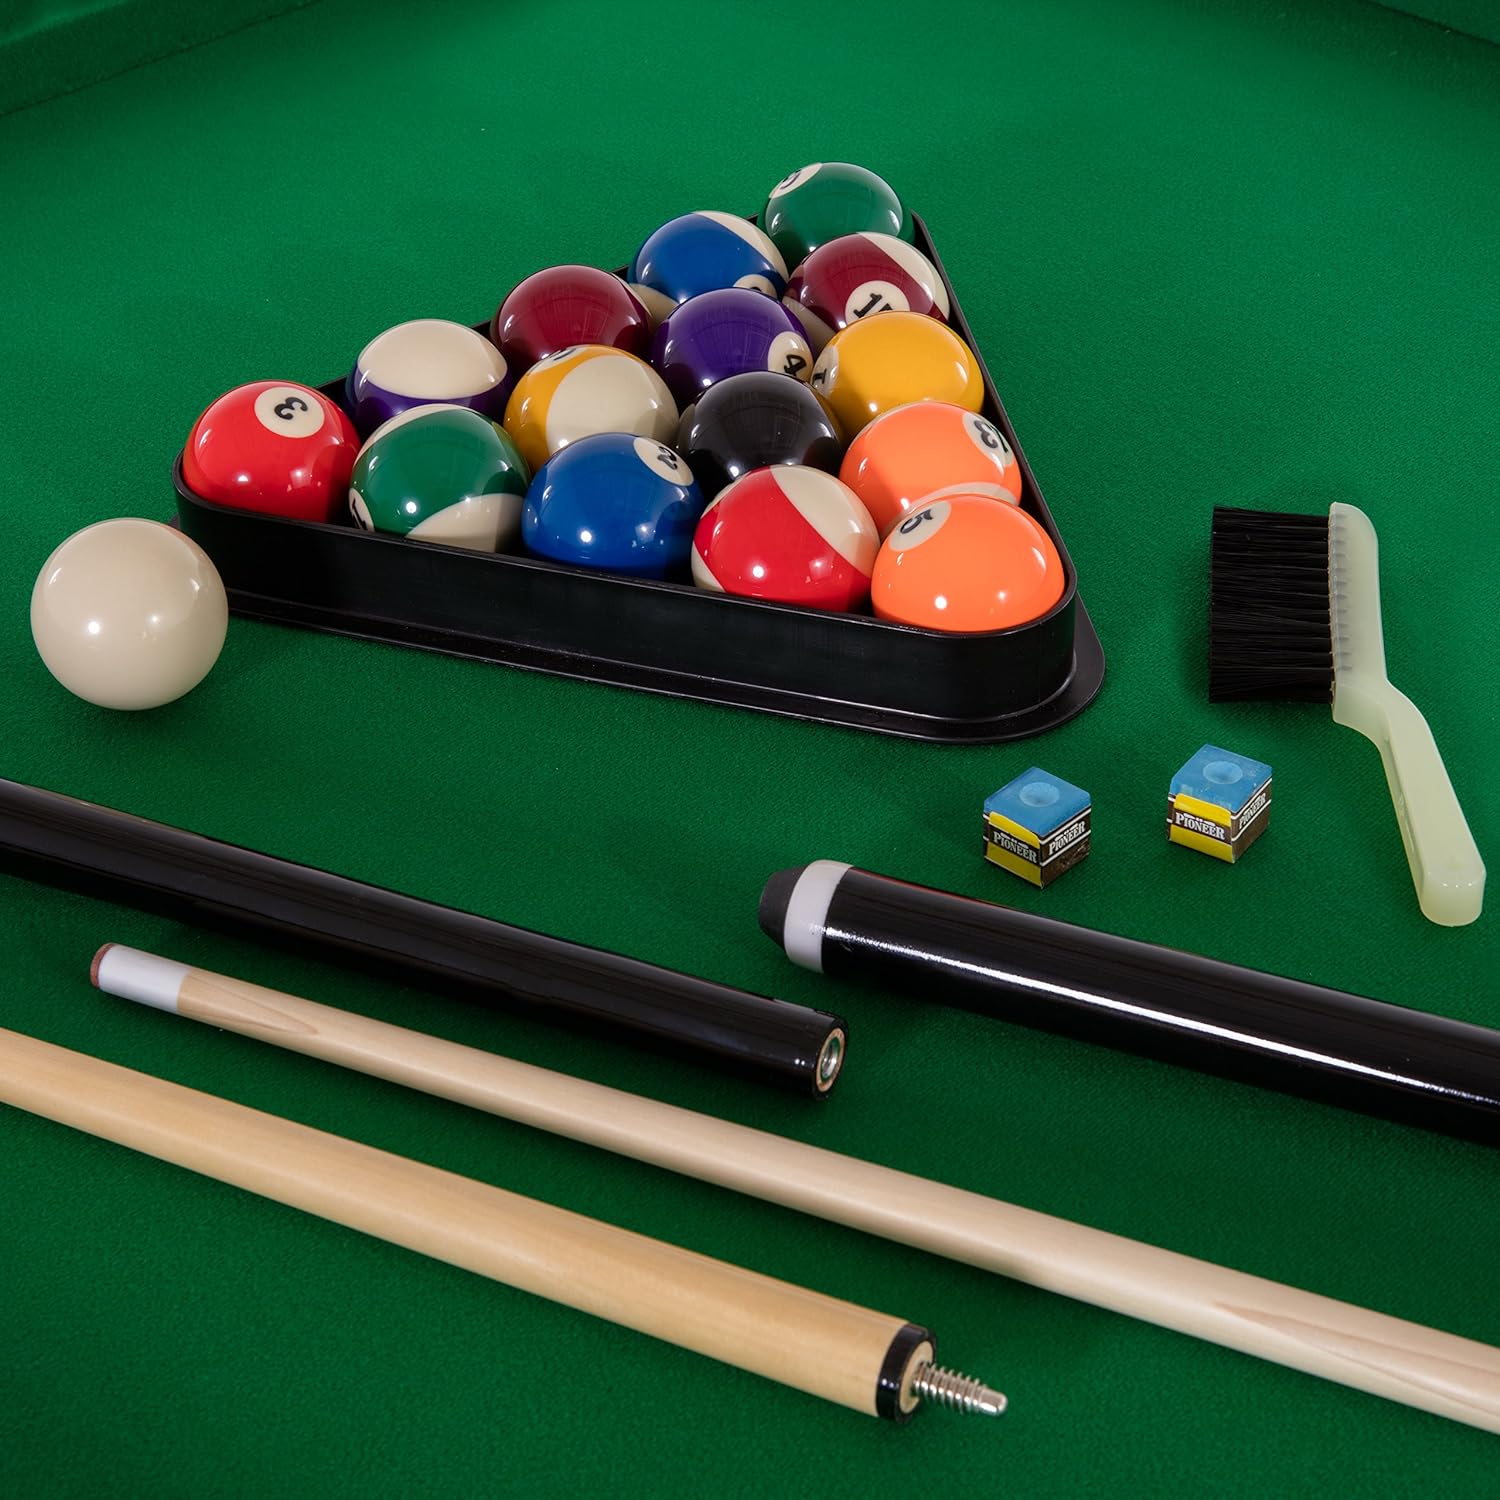 Triumph 3-in-1 7' Rotating Swivel Multigame Table - Air Hockey, Pool, & Table Tennis- $500